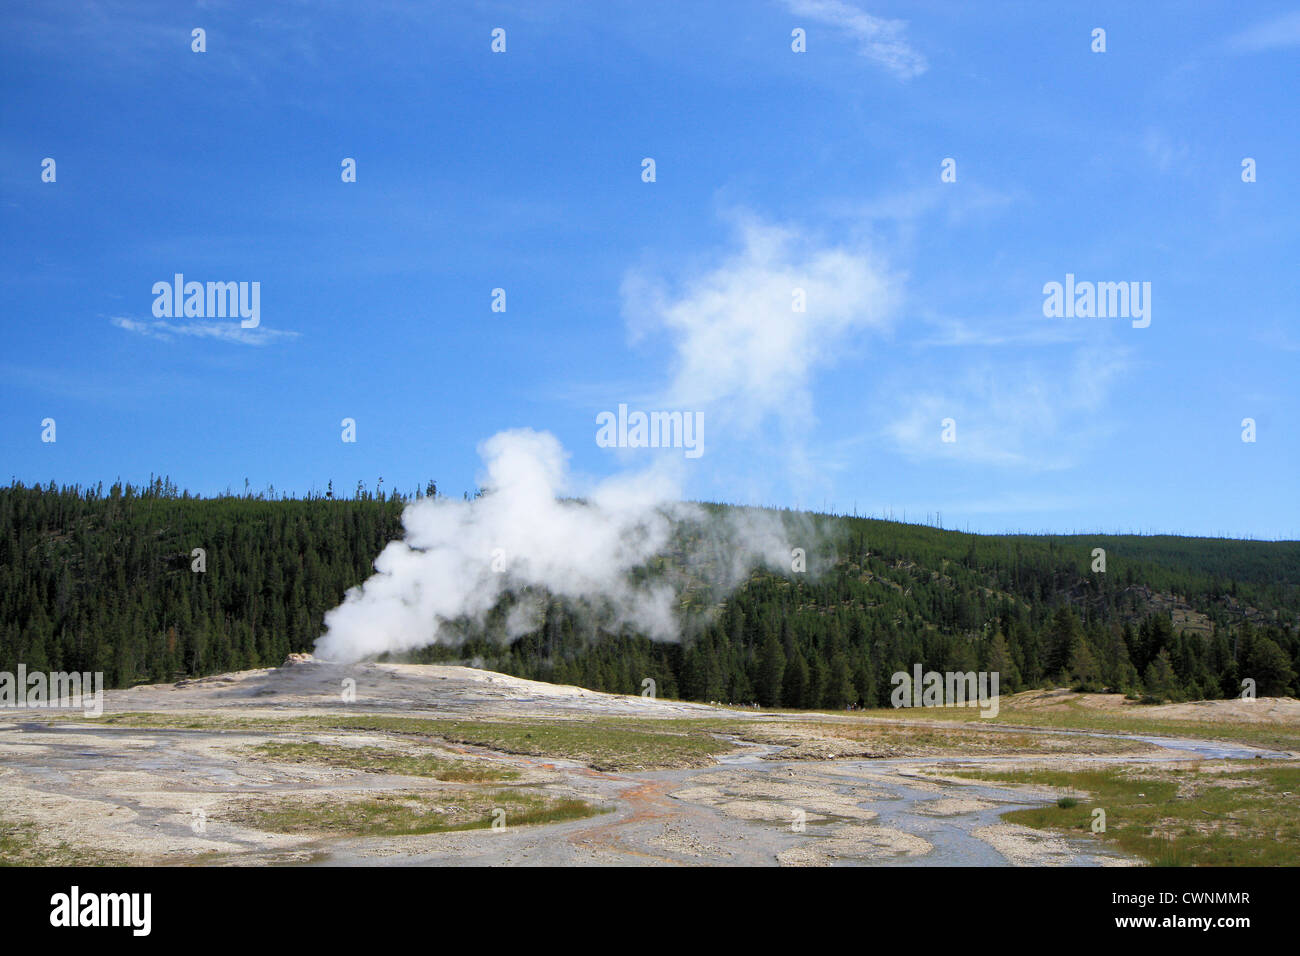 Old Faithful Geyser dans le parc national de Yellowstone, Wyoming, USA Banque D'Images